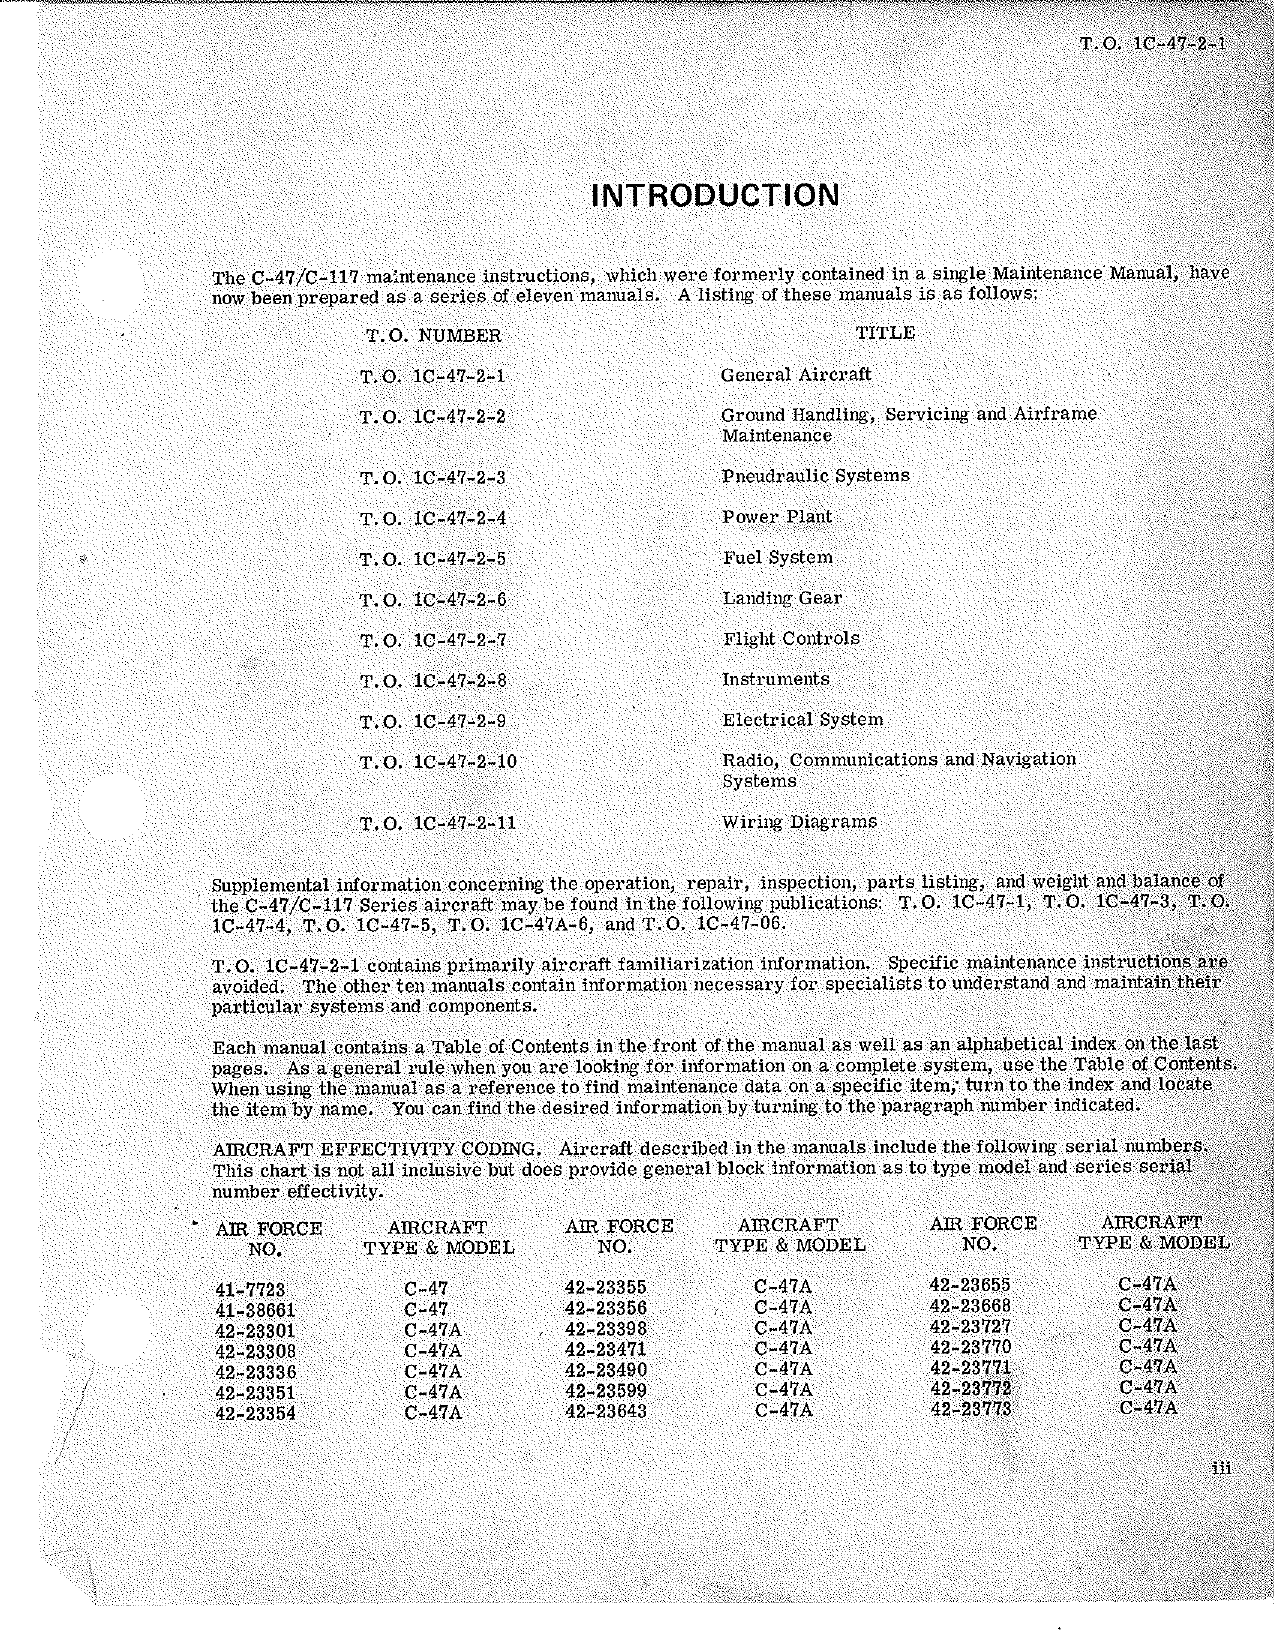 Sample page 5 from AirCorps Library document: Maintenance Instructions for C-47, C-47A, C-47B, C-47D, AC-47, EC-47, RC-47, C-117A, C-117B, and C-117C